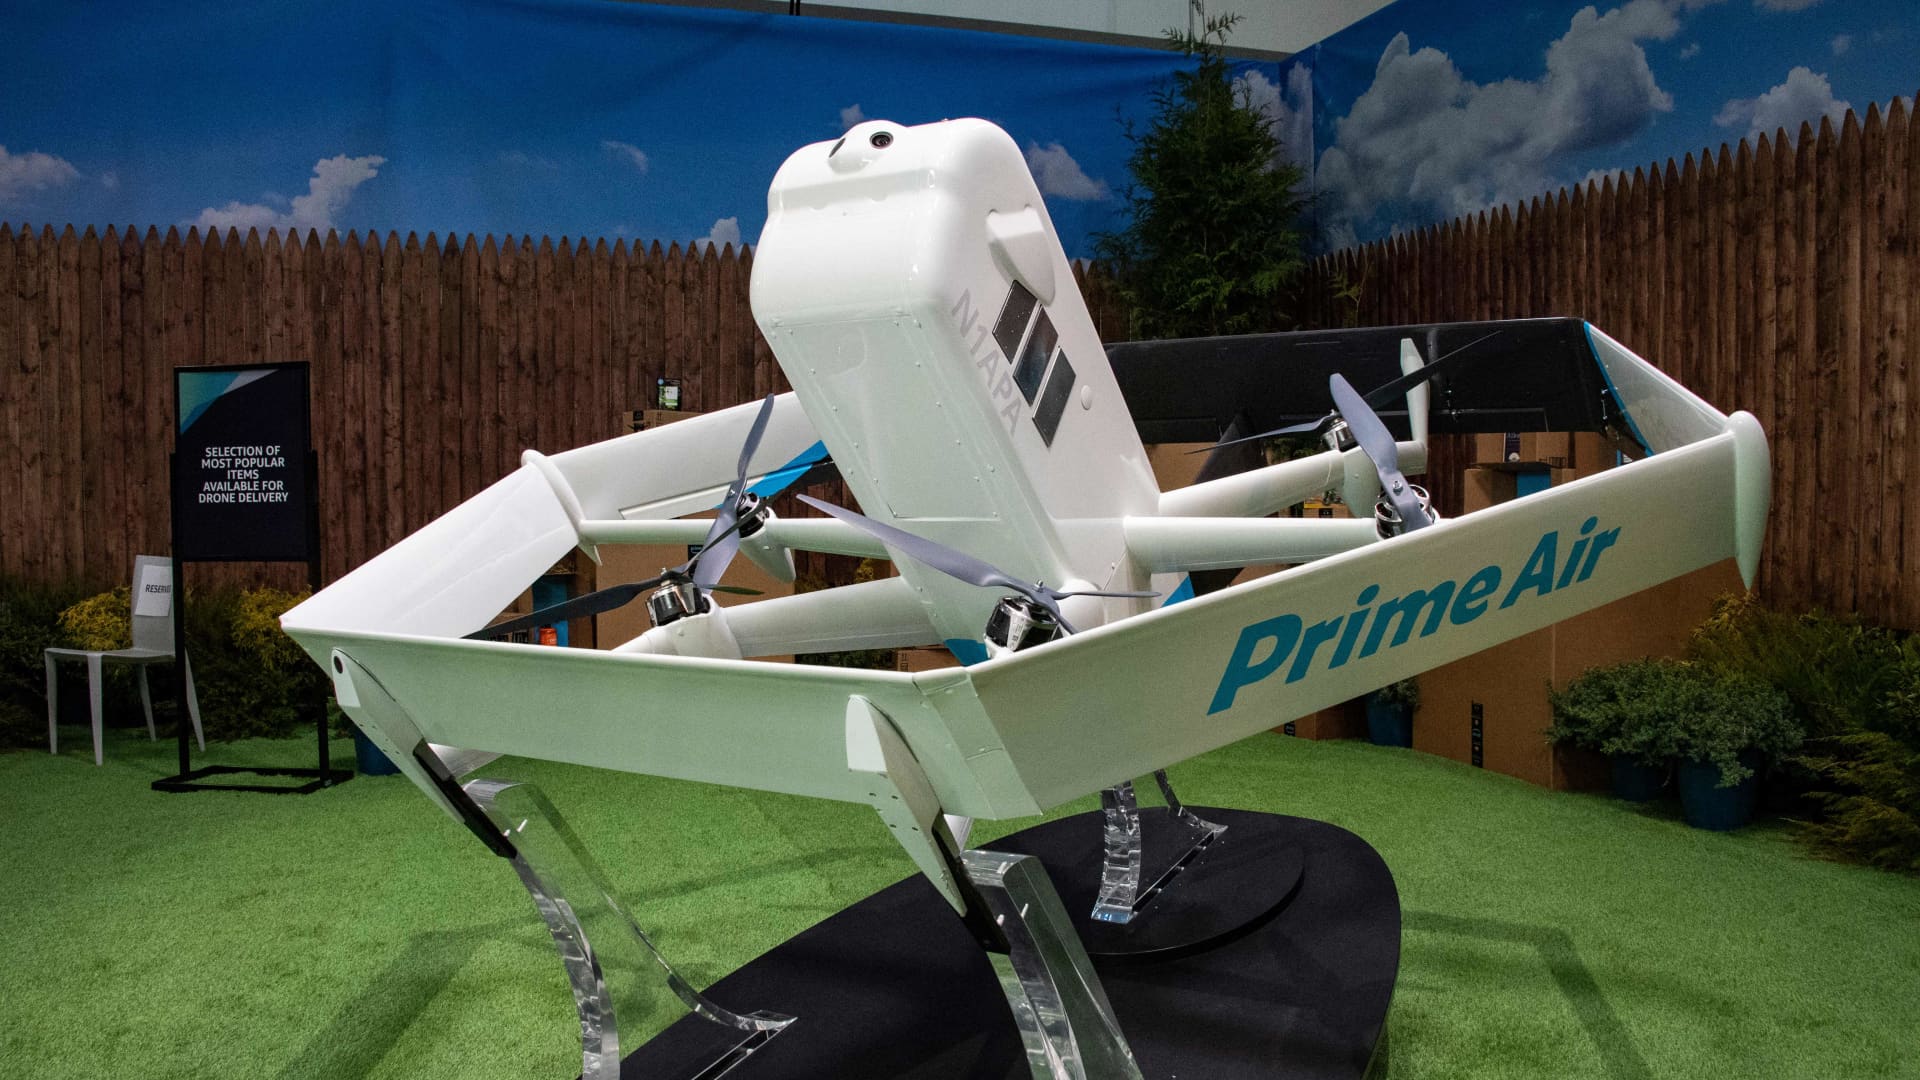 Amazon to expand drone delivery service after clearing FAA hurdle